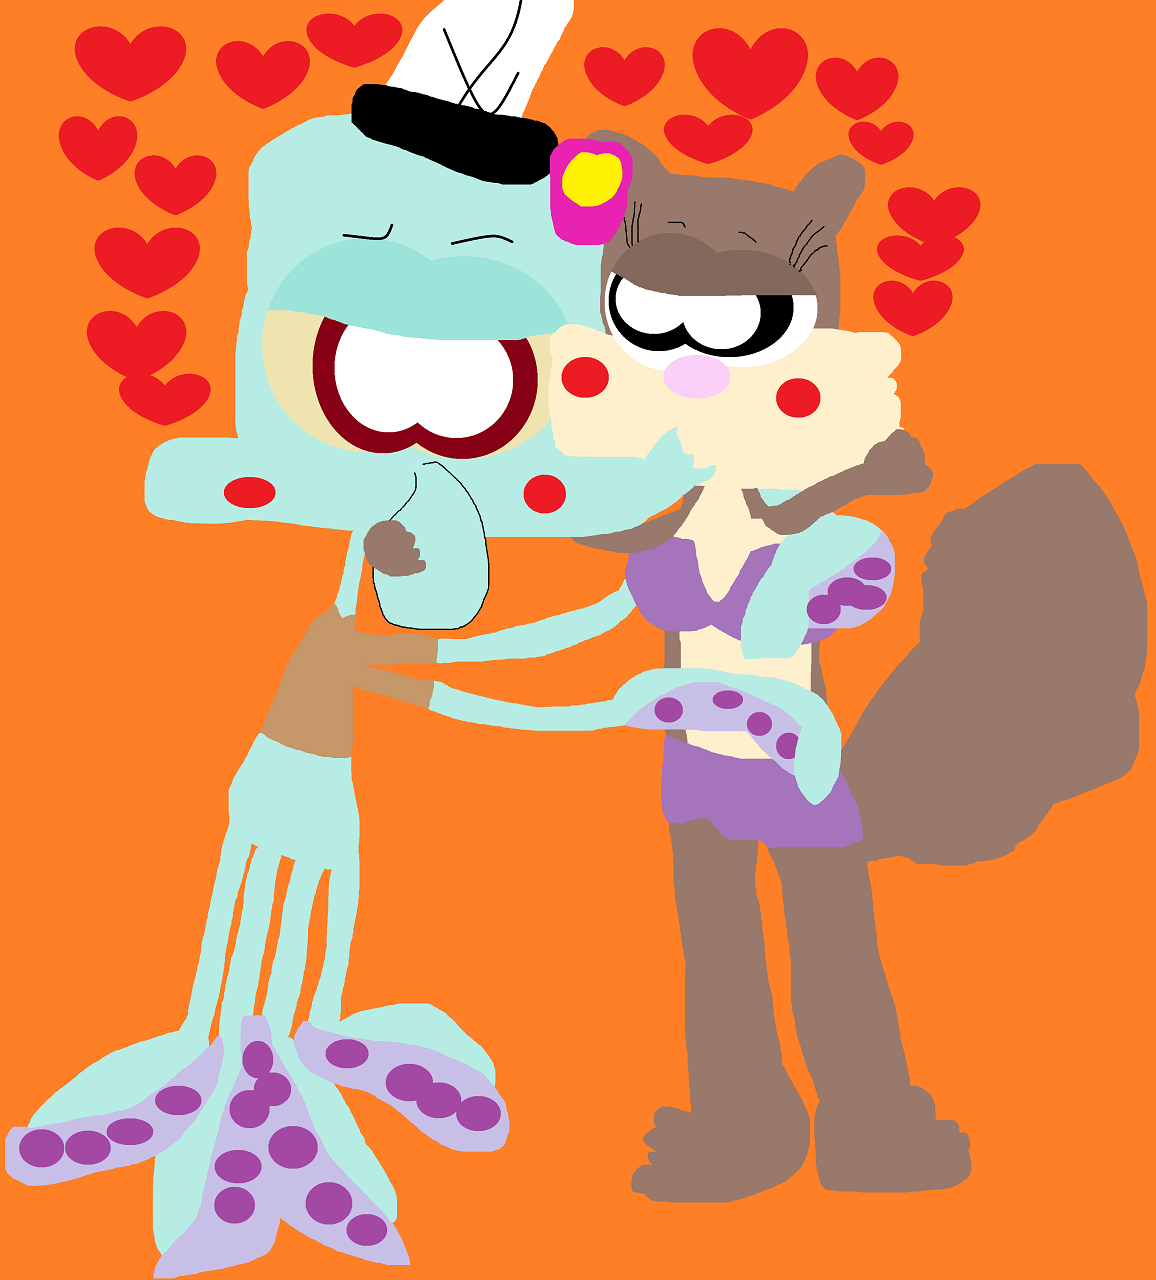 Yet Another Random Squidward And Sandy Kissing by Falconlobo